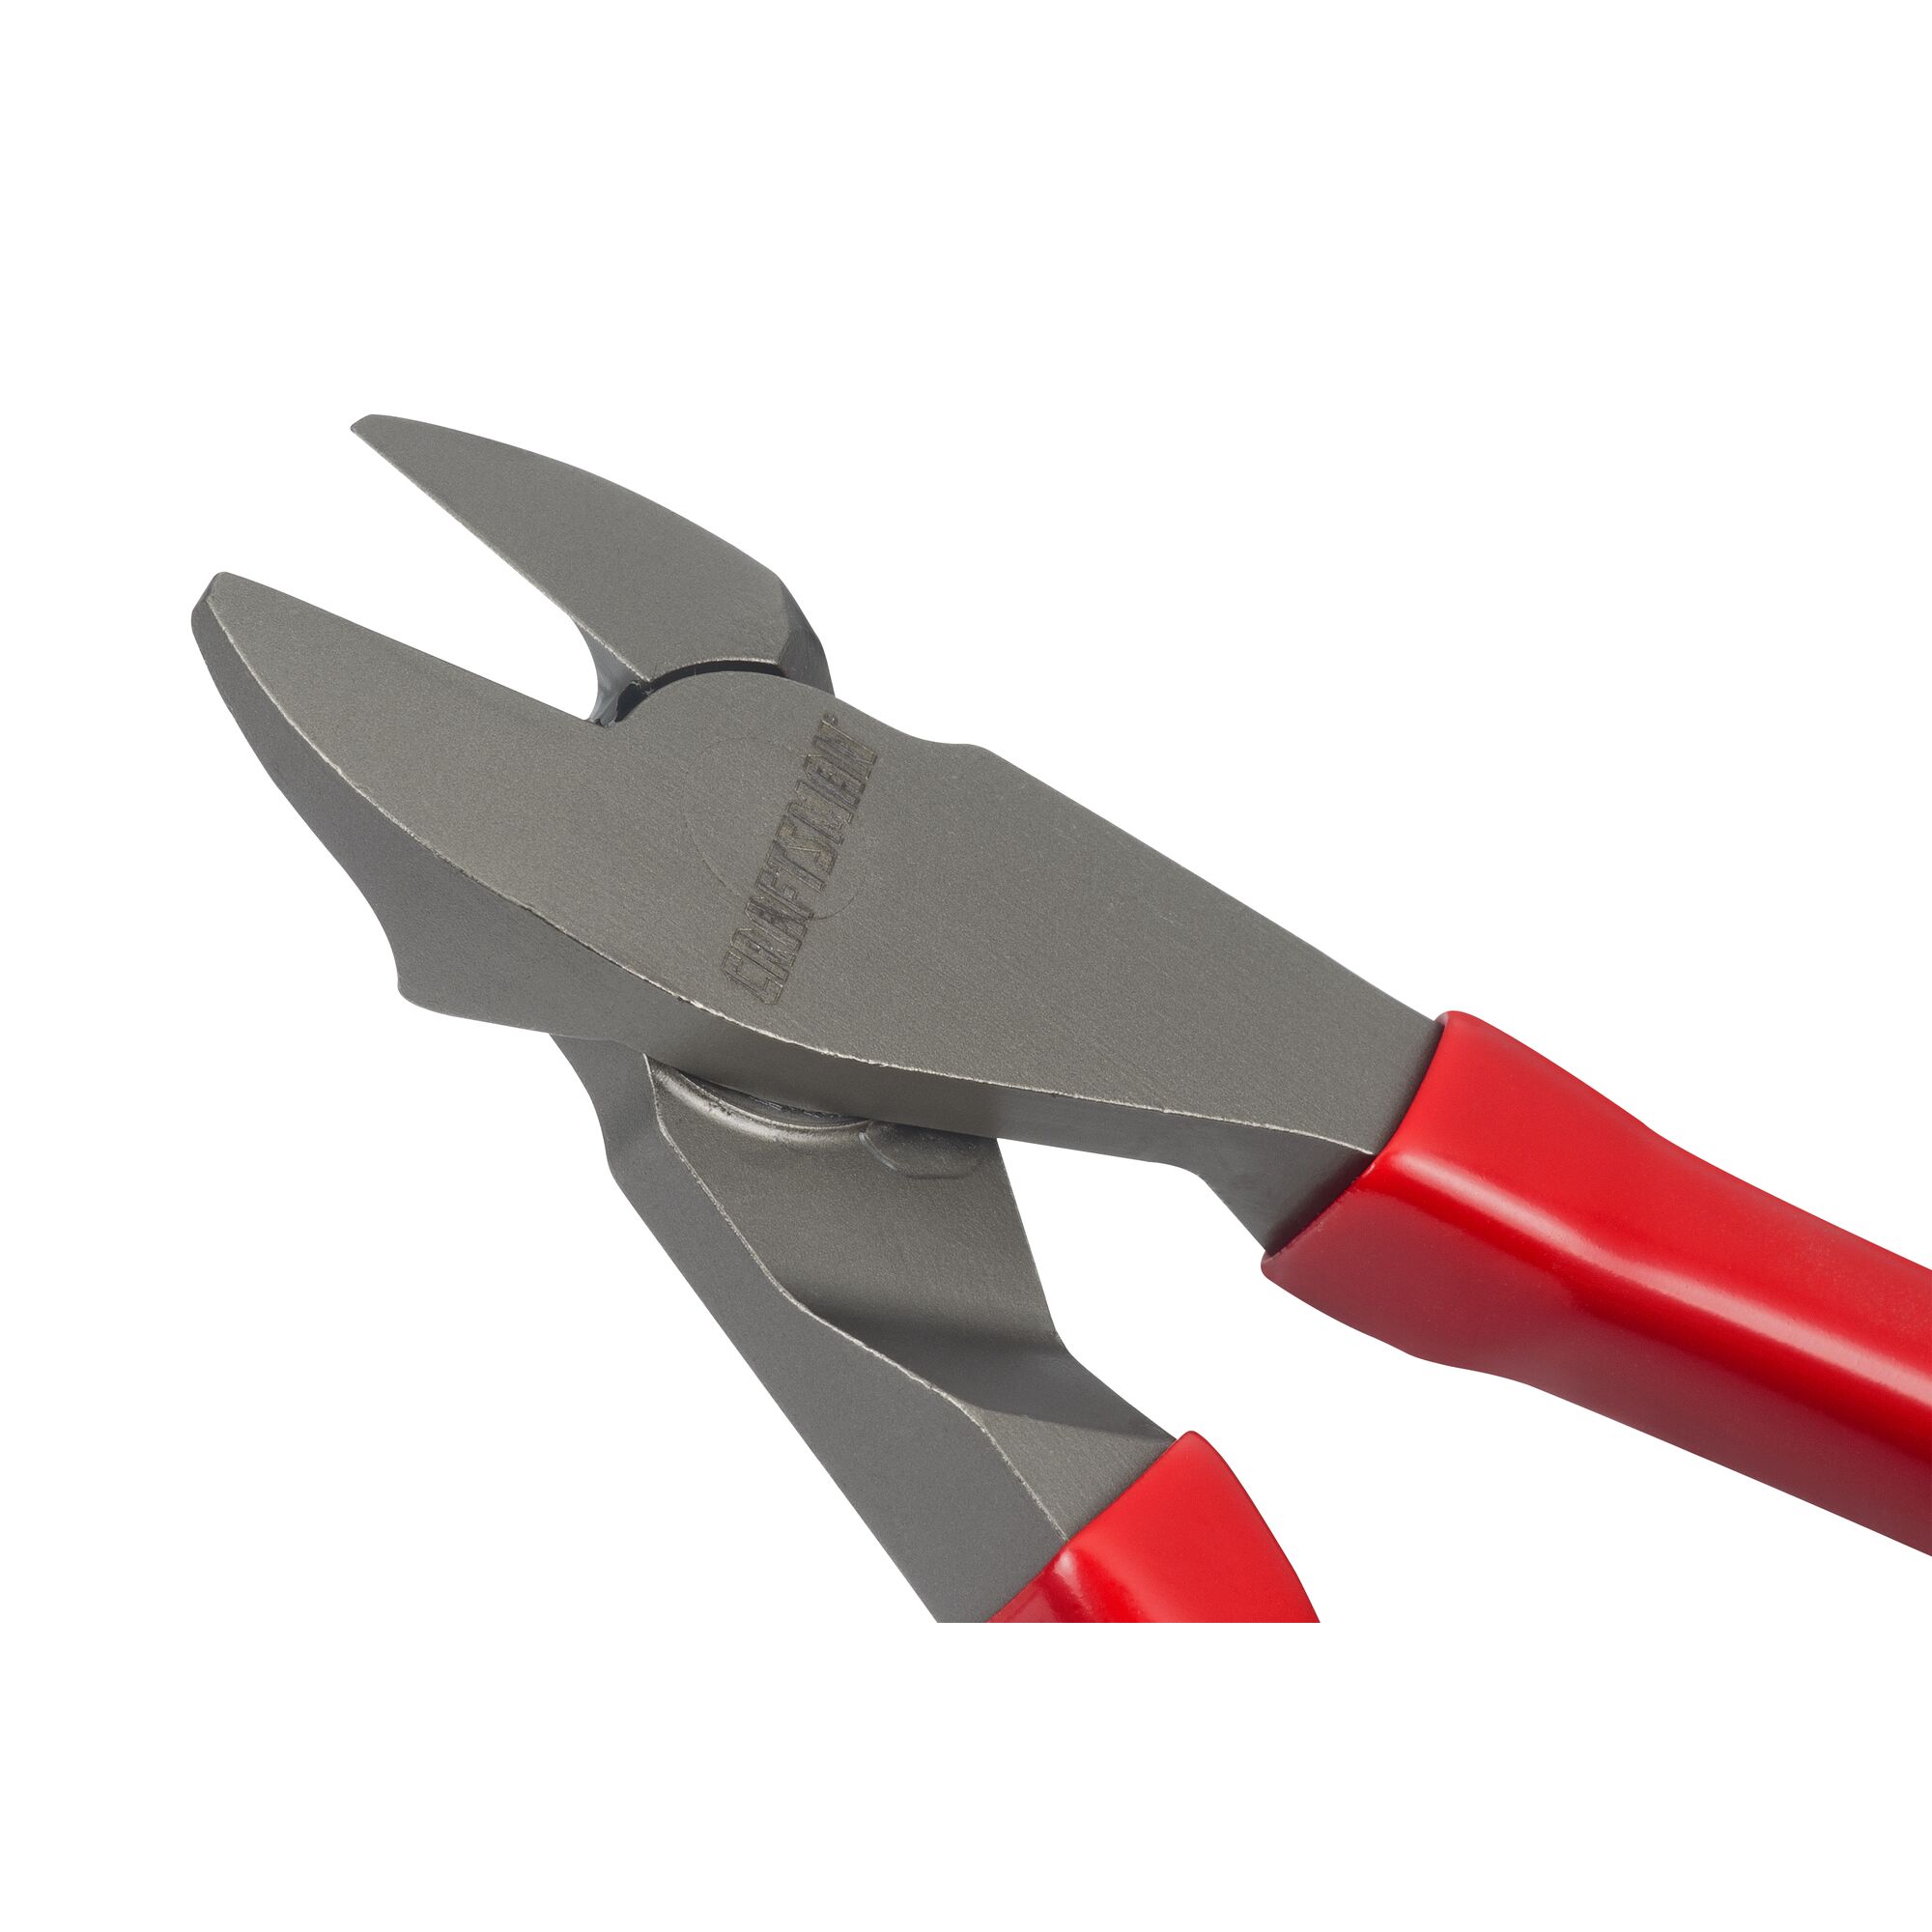 View of CRAFTSMAN Pliers: Diagonal highlighting  product features